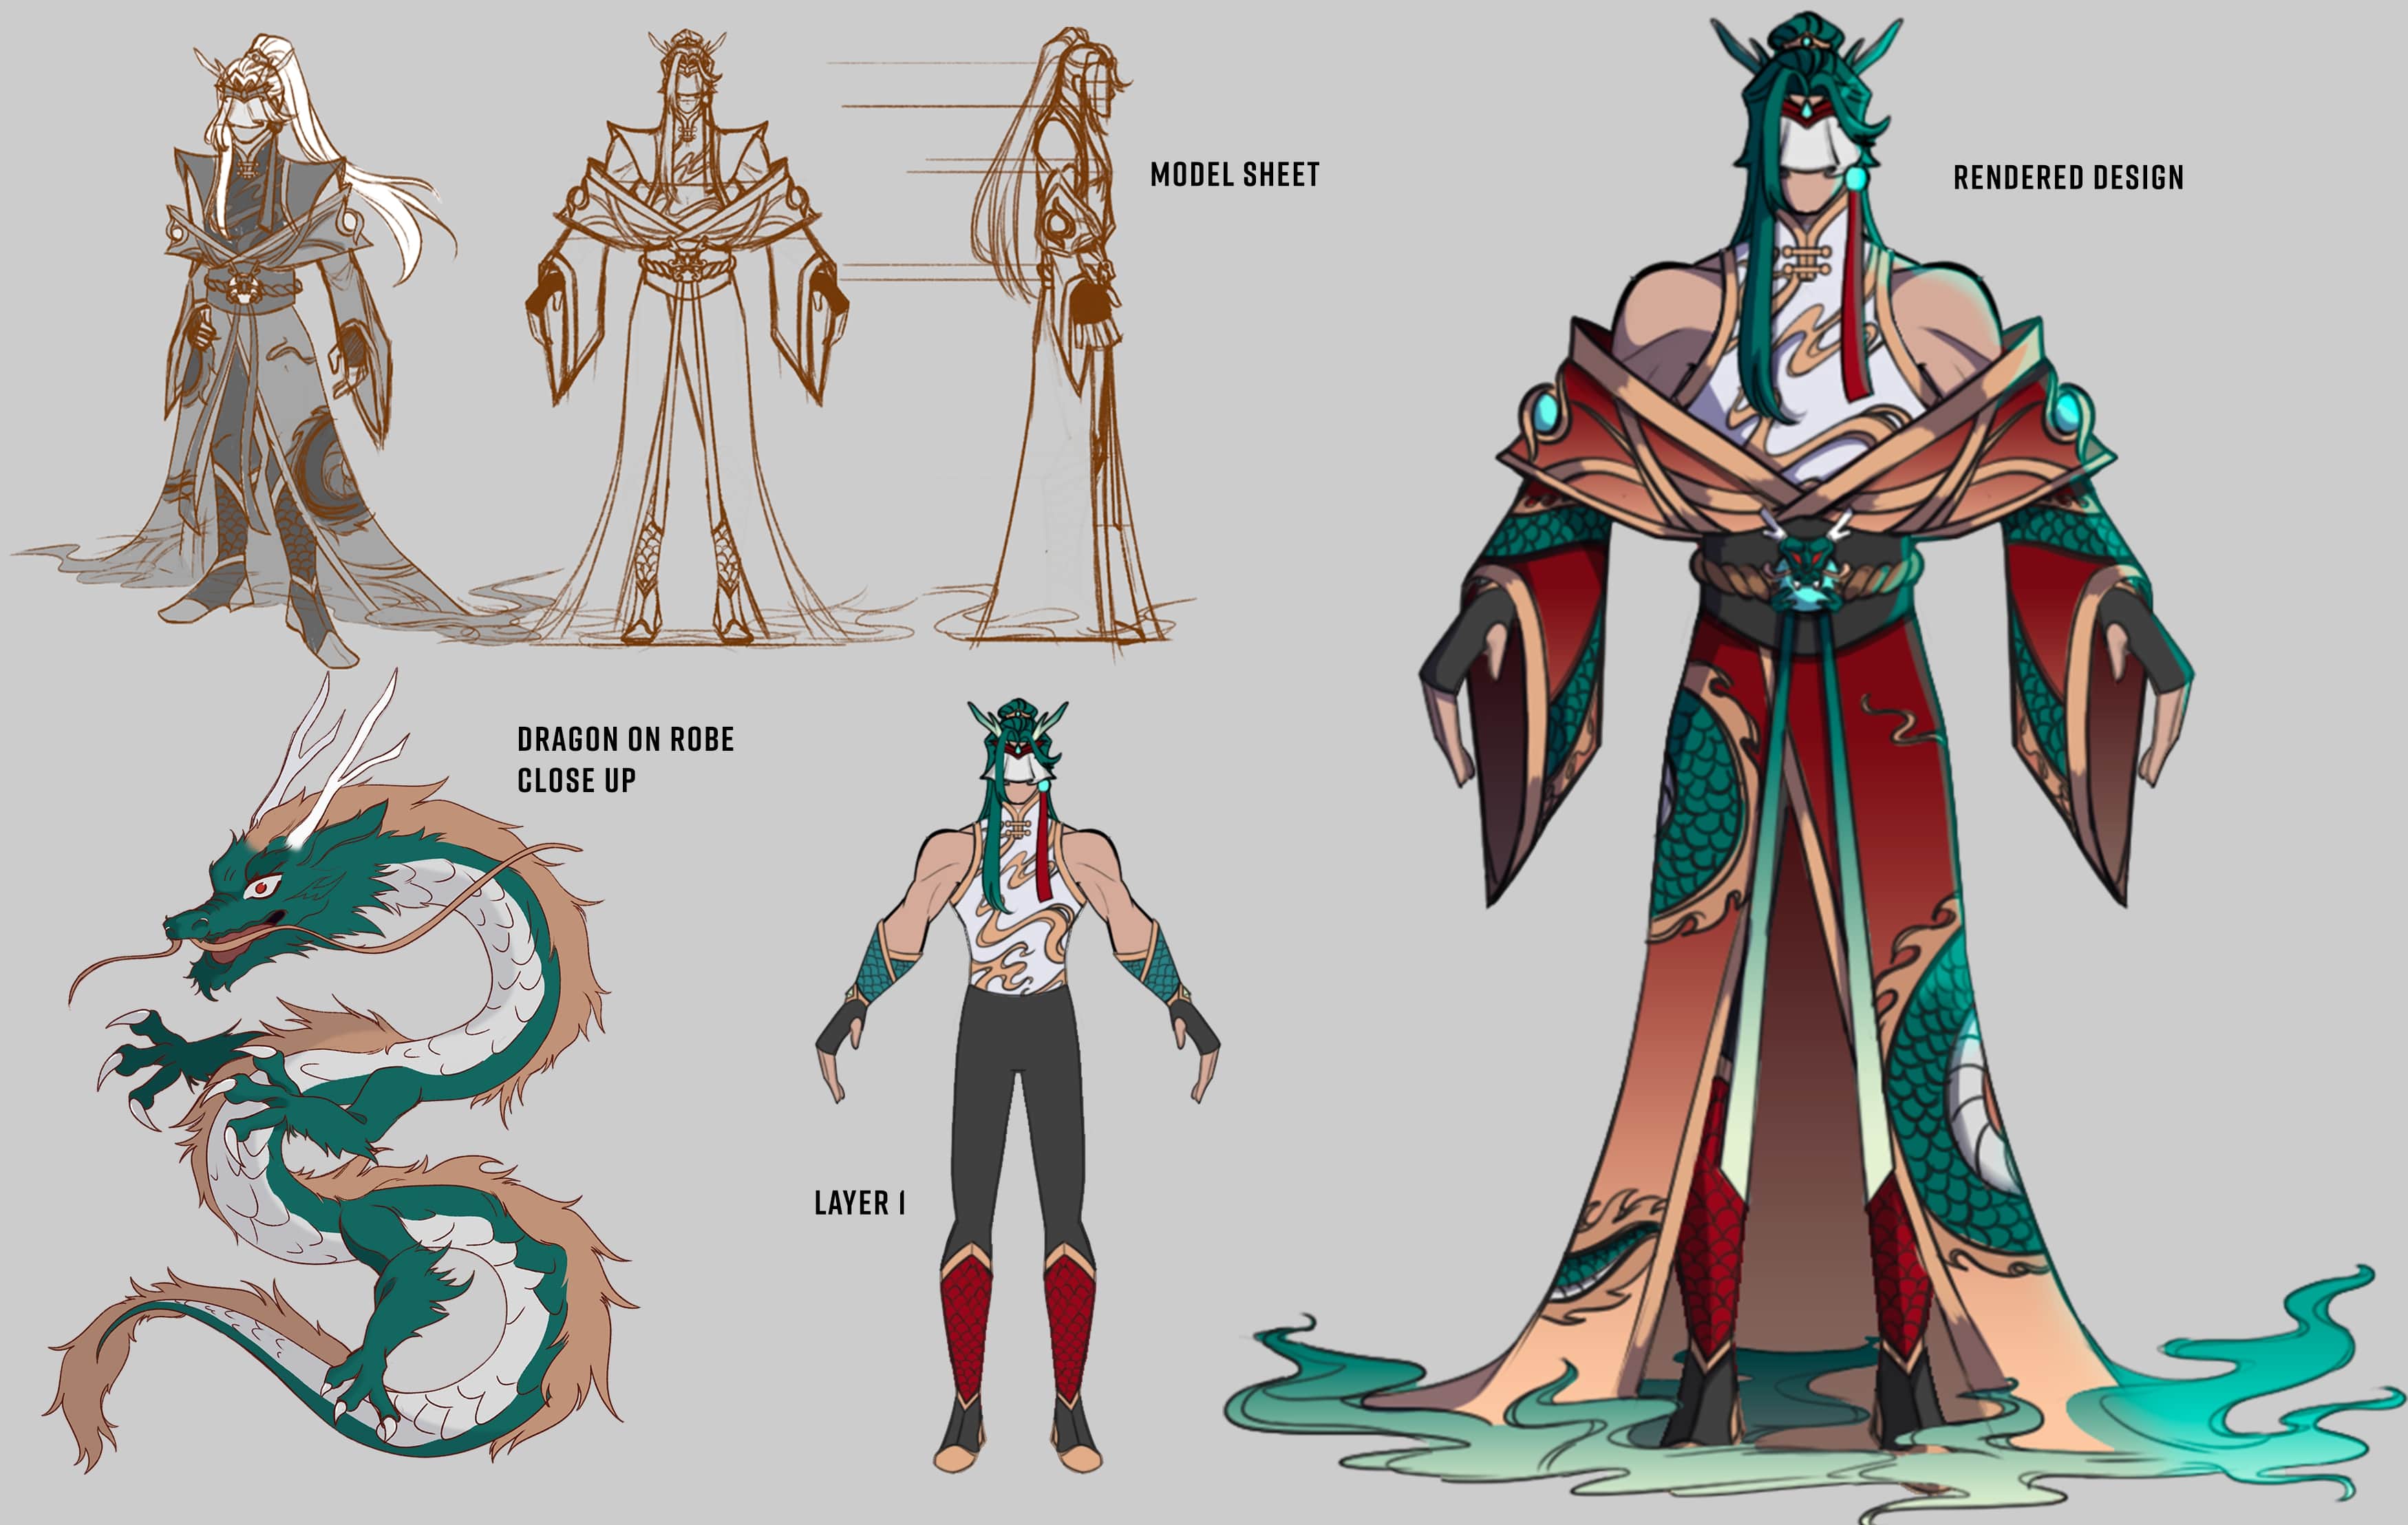 After solidifying on a design, I started playing with Royal Reds, Gold along with the blacks and whites to match the Heavenscale skin line. Originally, he had a white role with a red dragon and gold accents but later on I decided to focus more on the gradients of crimson, ombre, and jade that were the core palette of the skinline. 